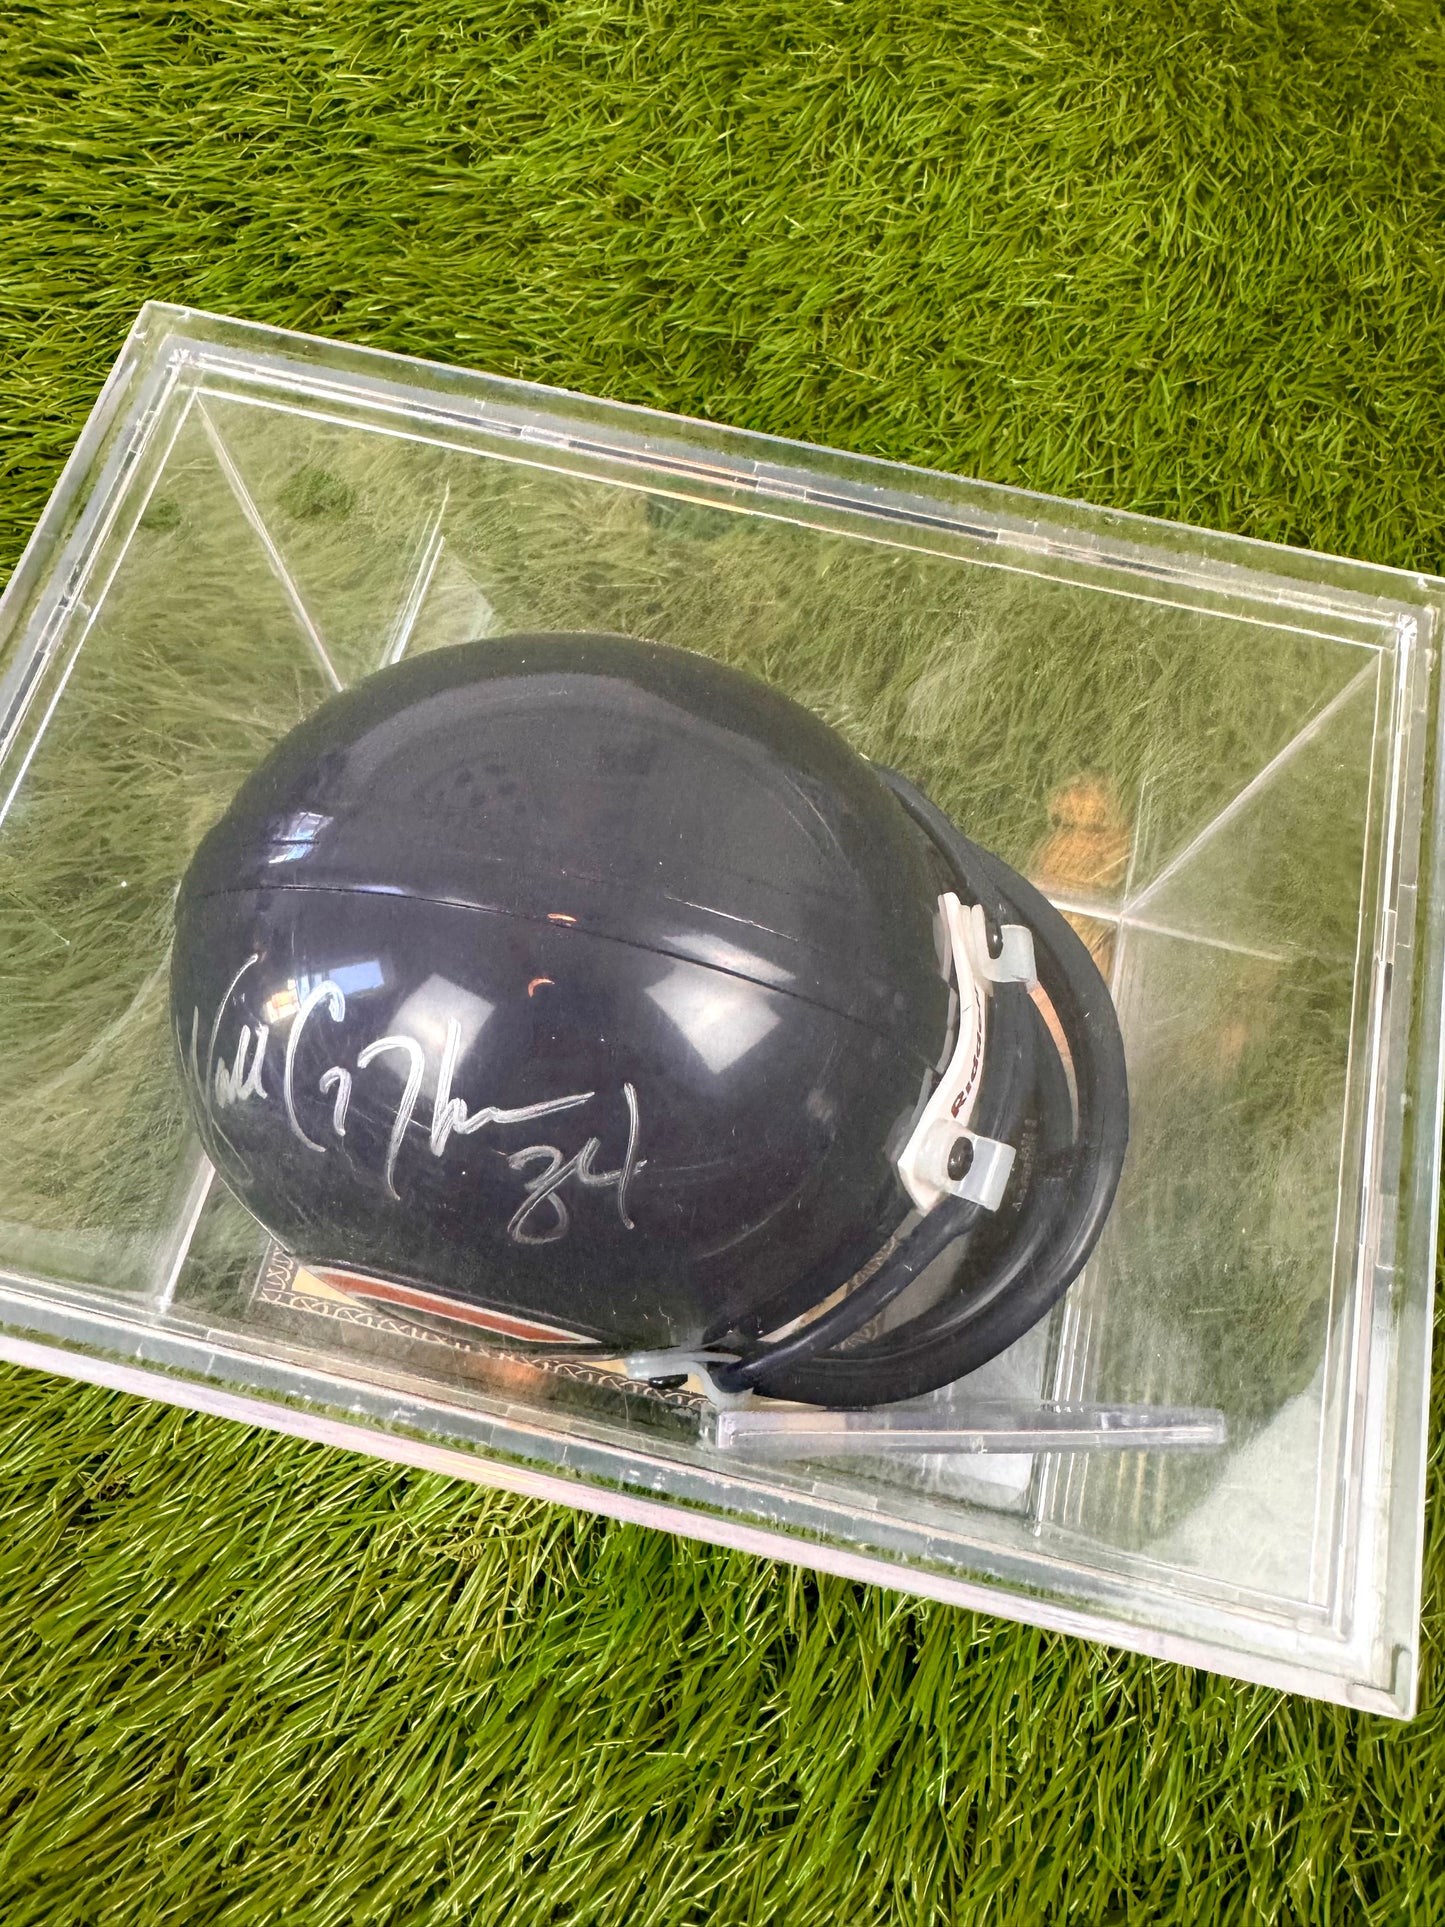 Chicago Bears Walter Payton Signed Autographed NFL Mini Football Helmet and Card